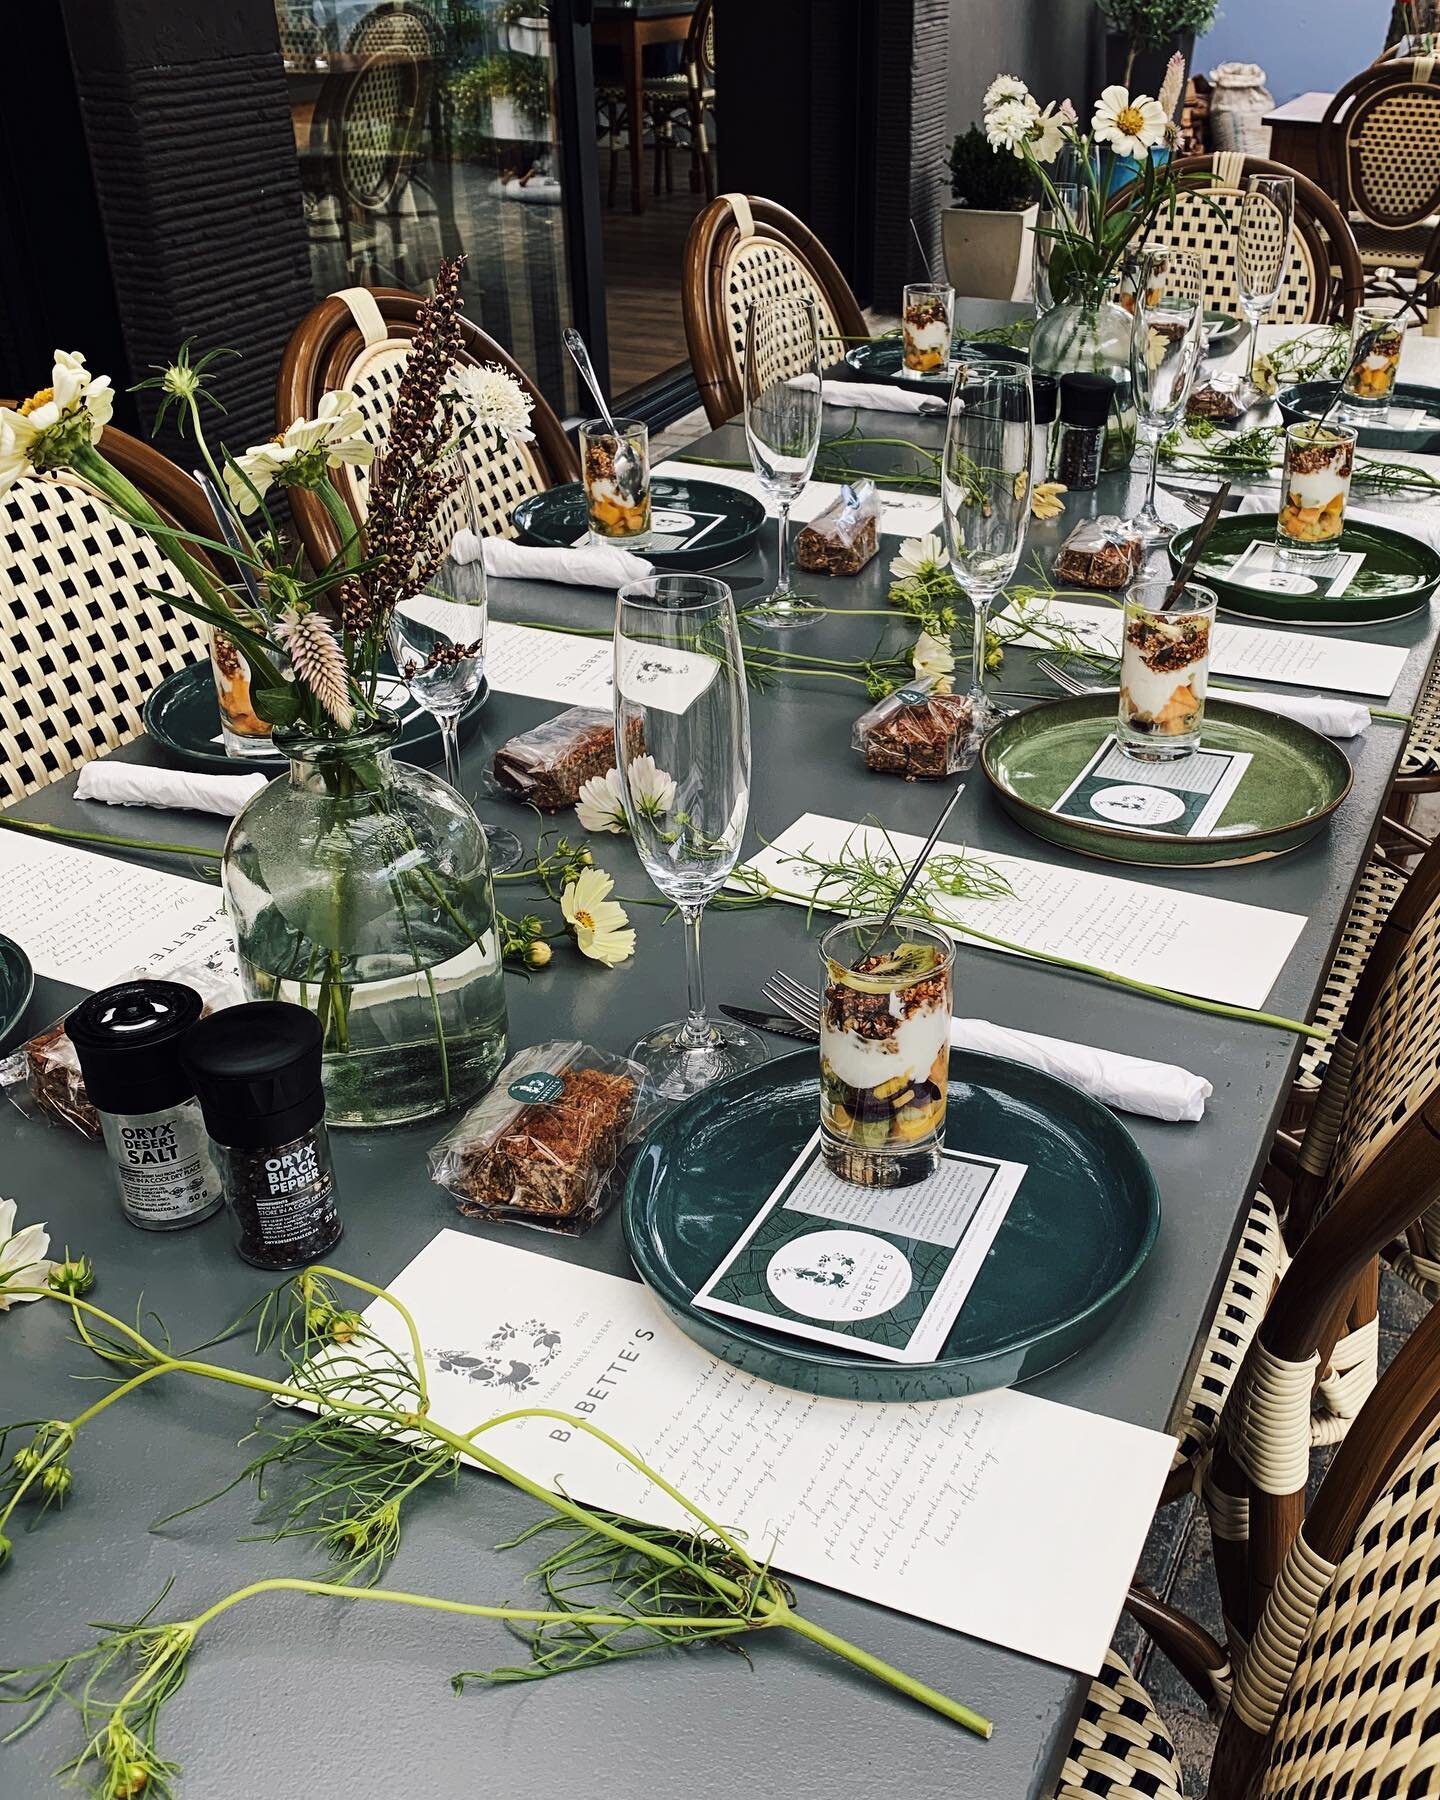 We just love our beautiful intimate space and the events it can hold ✨ What a fun morning with @cocobeanliving&rsquo;s SM event showcasing our gluten free menu options, sipping on @waterkloofwines MCC and discussing the importance of nourishing our b